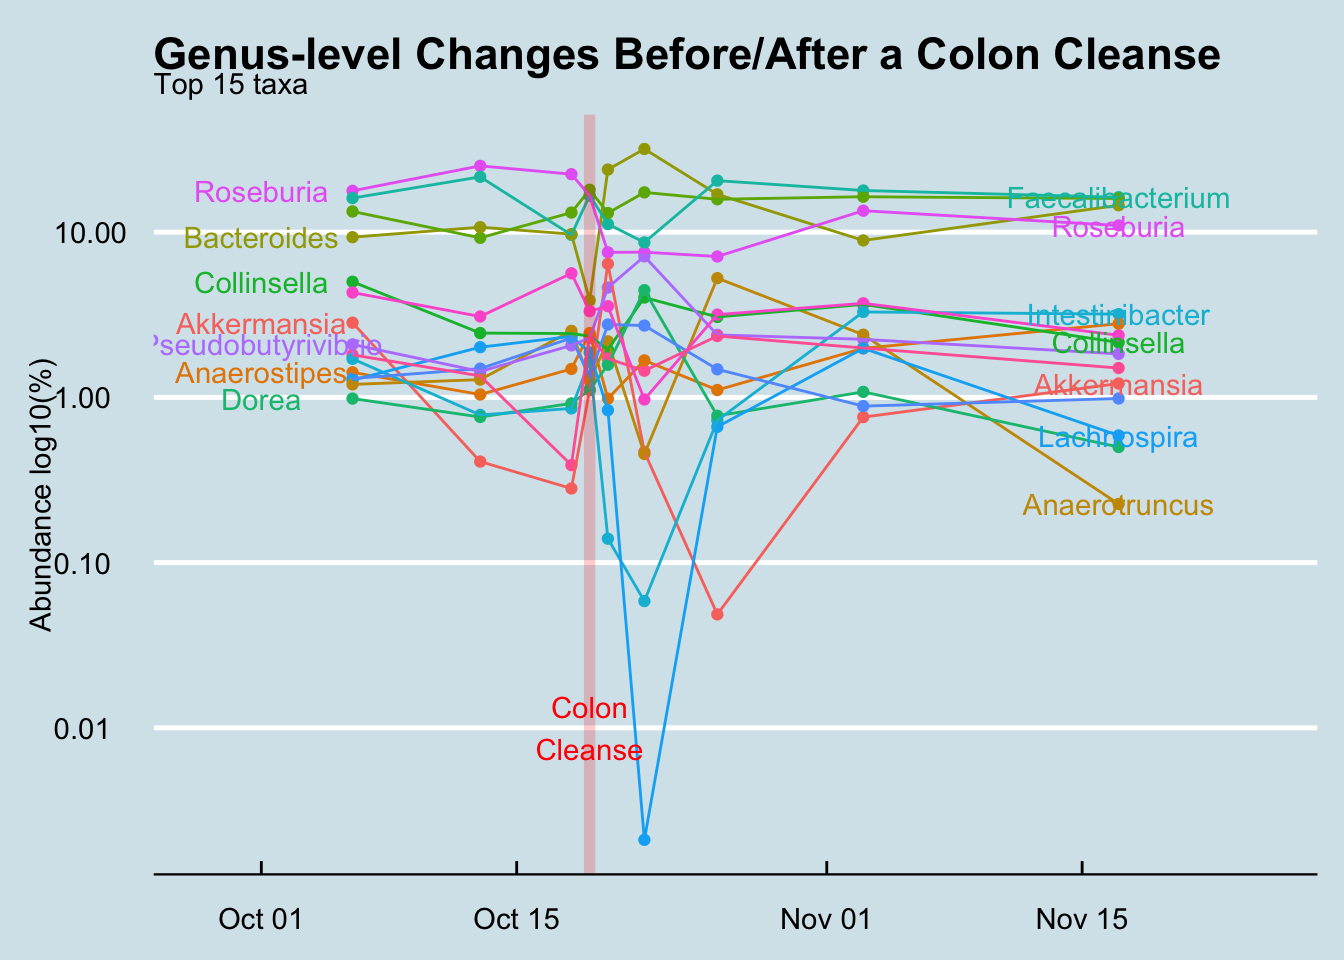 Overall Genus-level summary, from baseline (2 weeks before the cleanse) to CC (colon cleanse) to one month after CC.